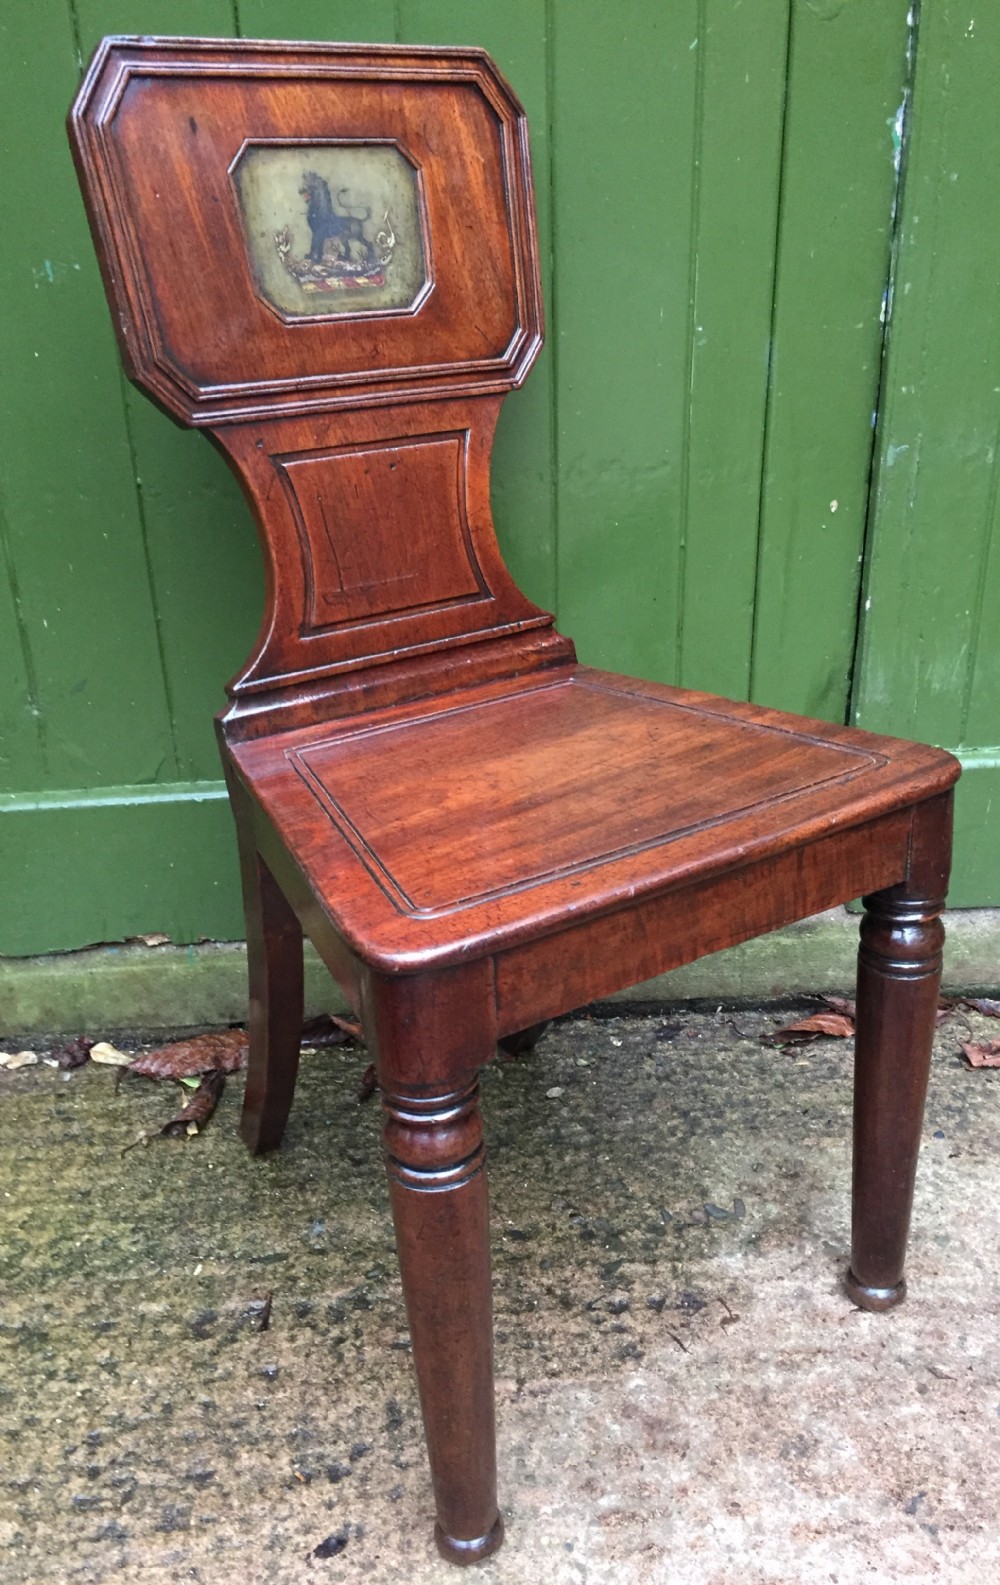 early c19th late george iii period mahogany hall or footman's chair